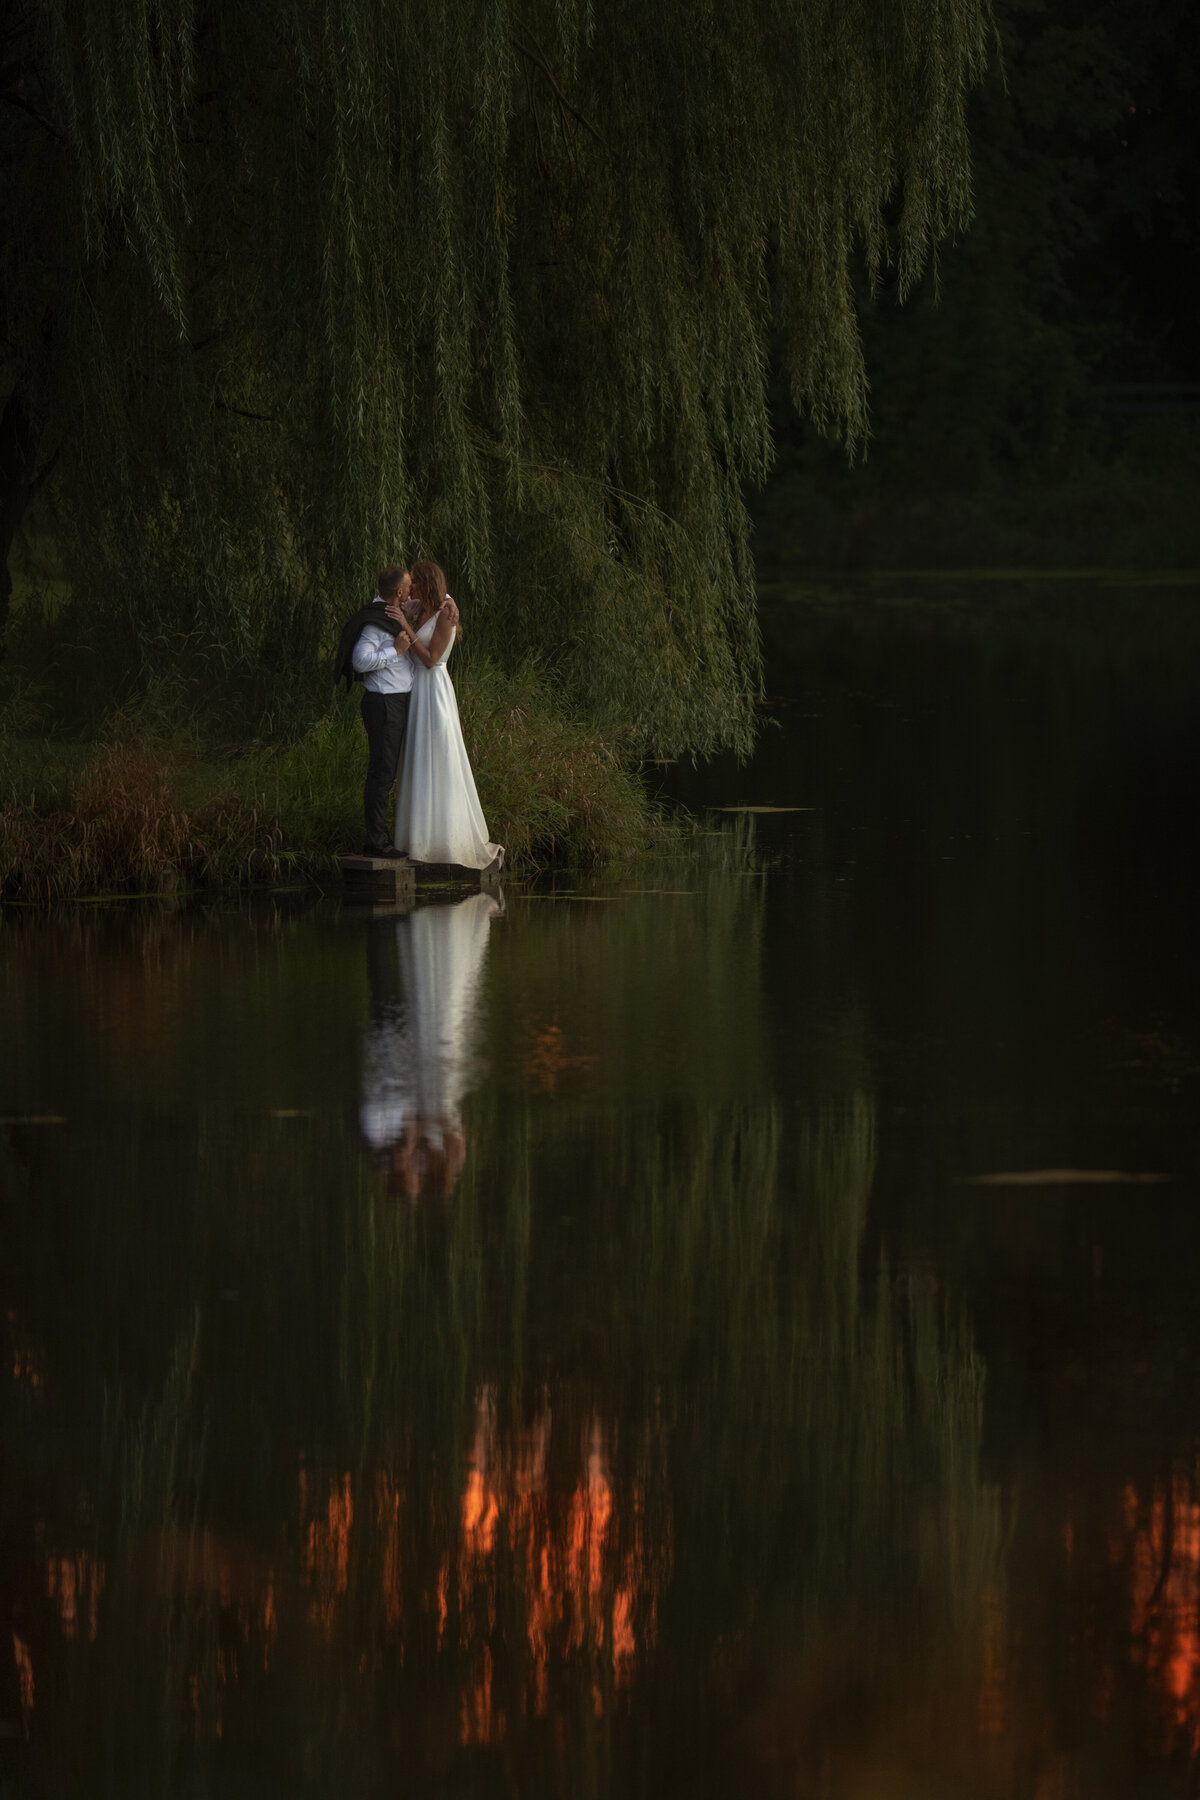 Bride and groom reflects on the lake during golden hour sunset photoshoot